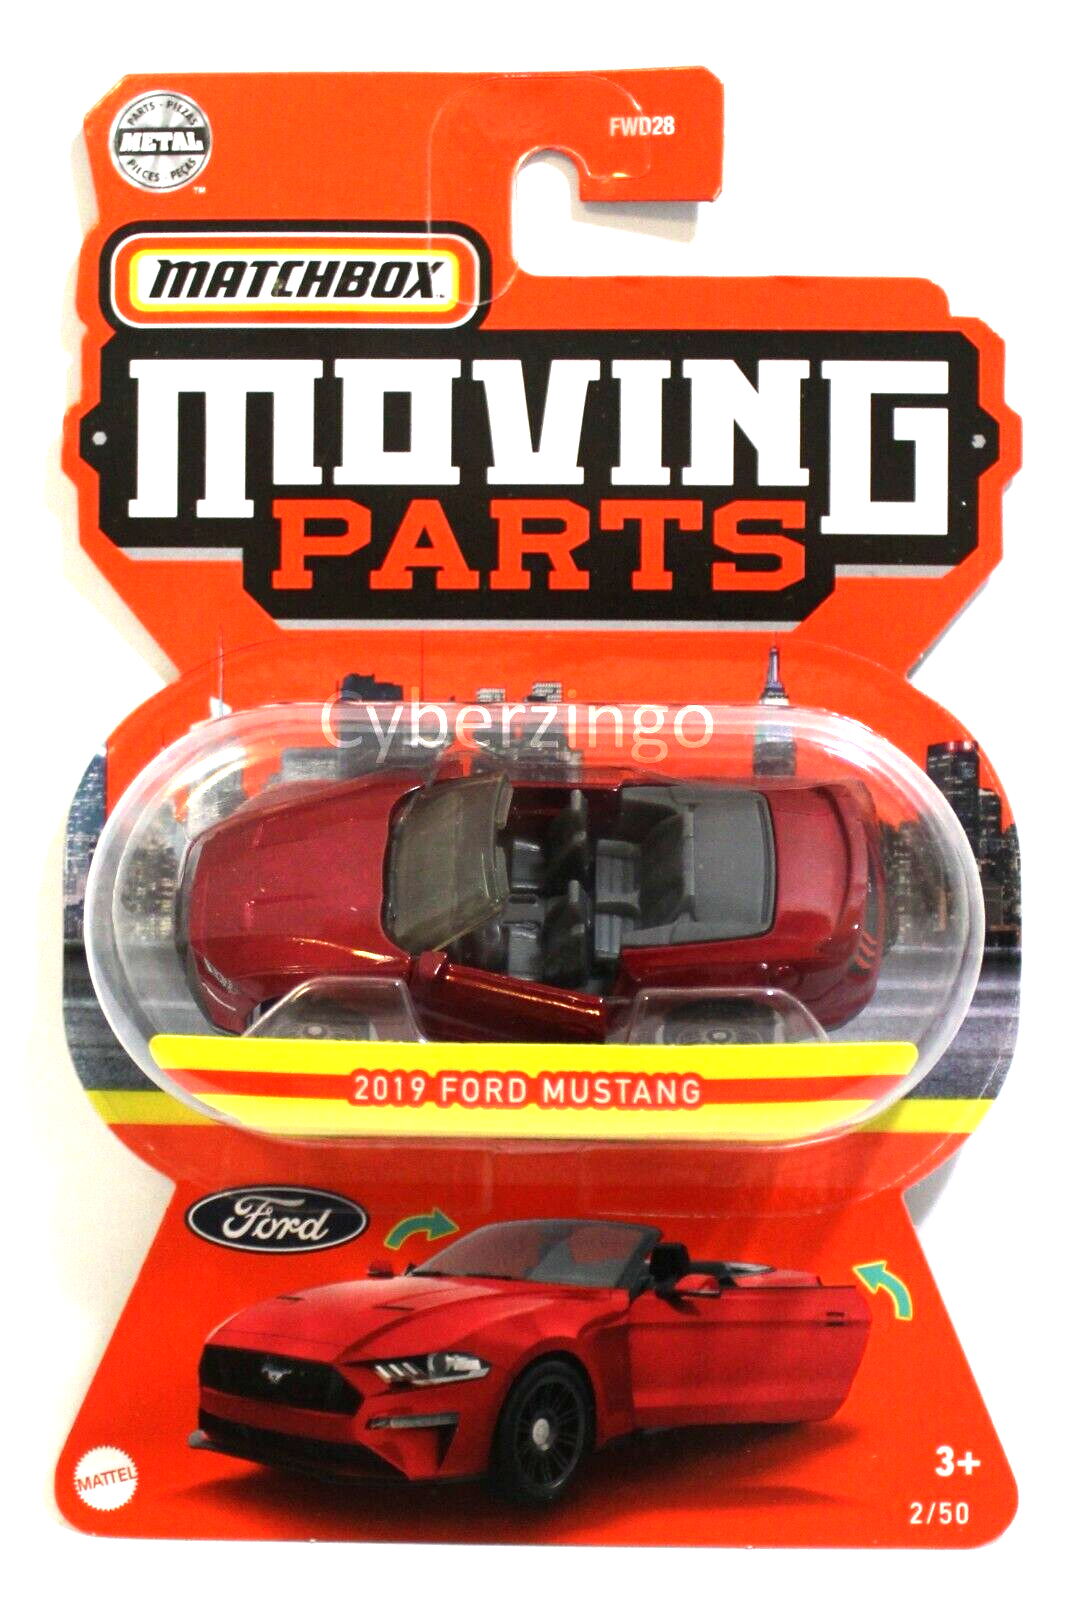 1:64 Matchbox Moving Parts 2019 Ford Mustang Diecast Model Car Red NEW - $13.99